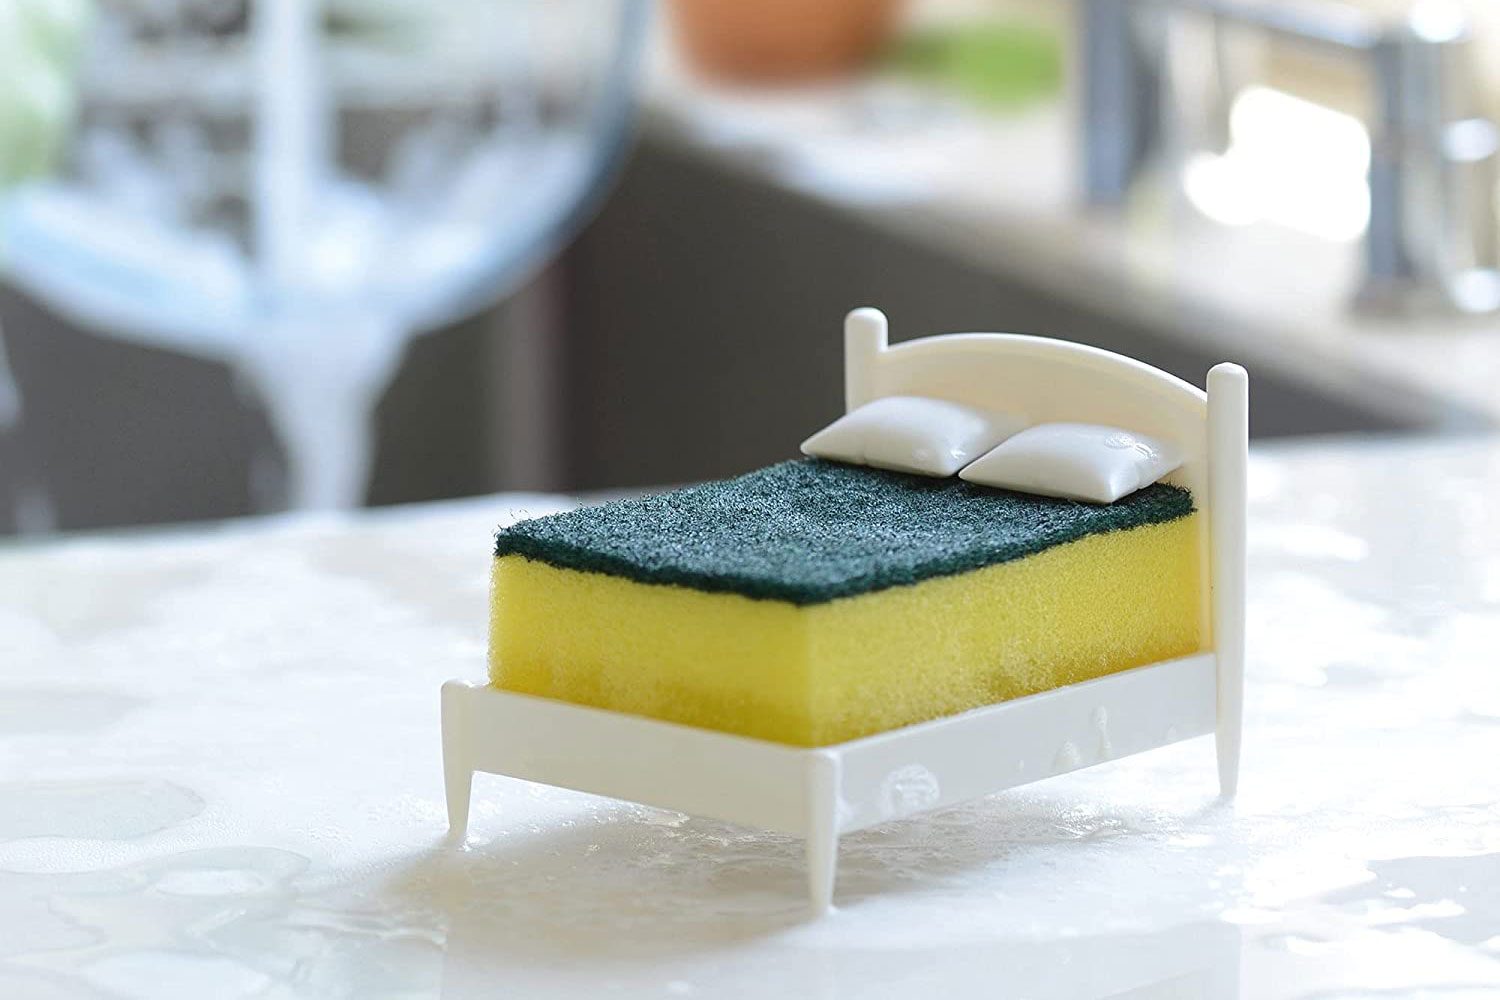 This Bed-Shaped Kitchen Sponge Holder Is the Gadget of Our Dreams